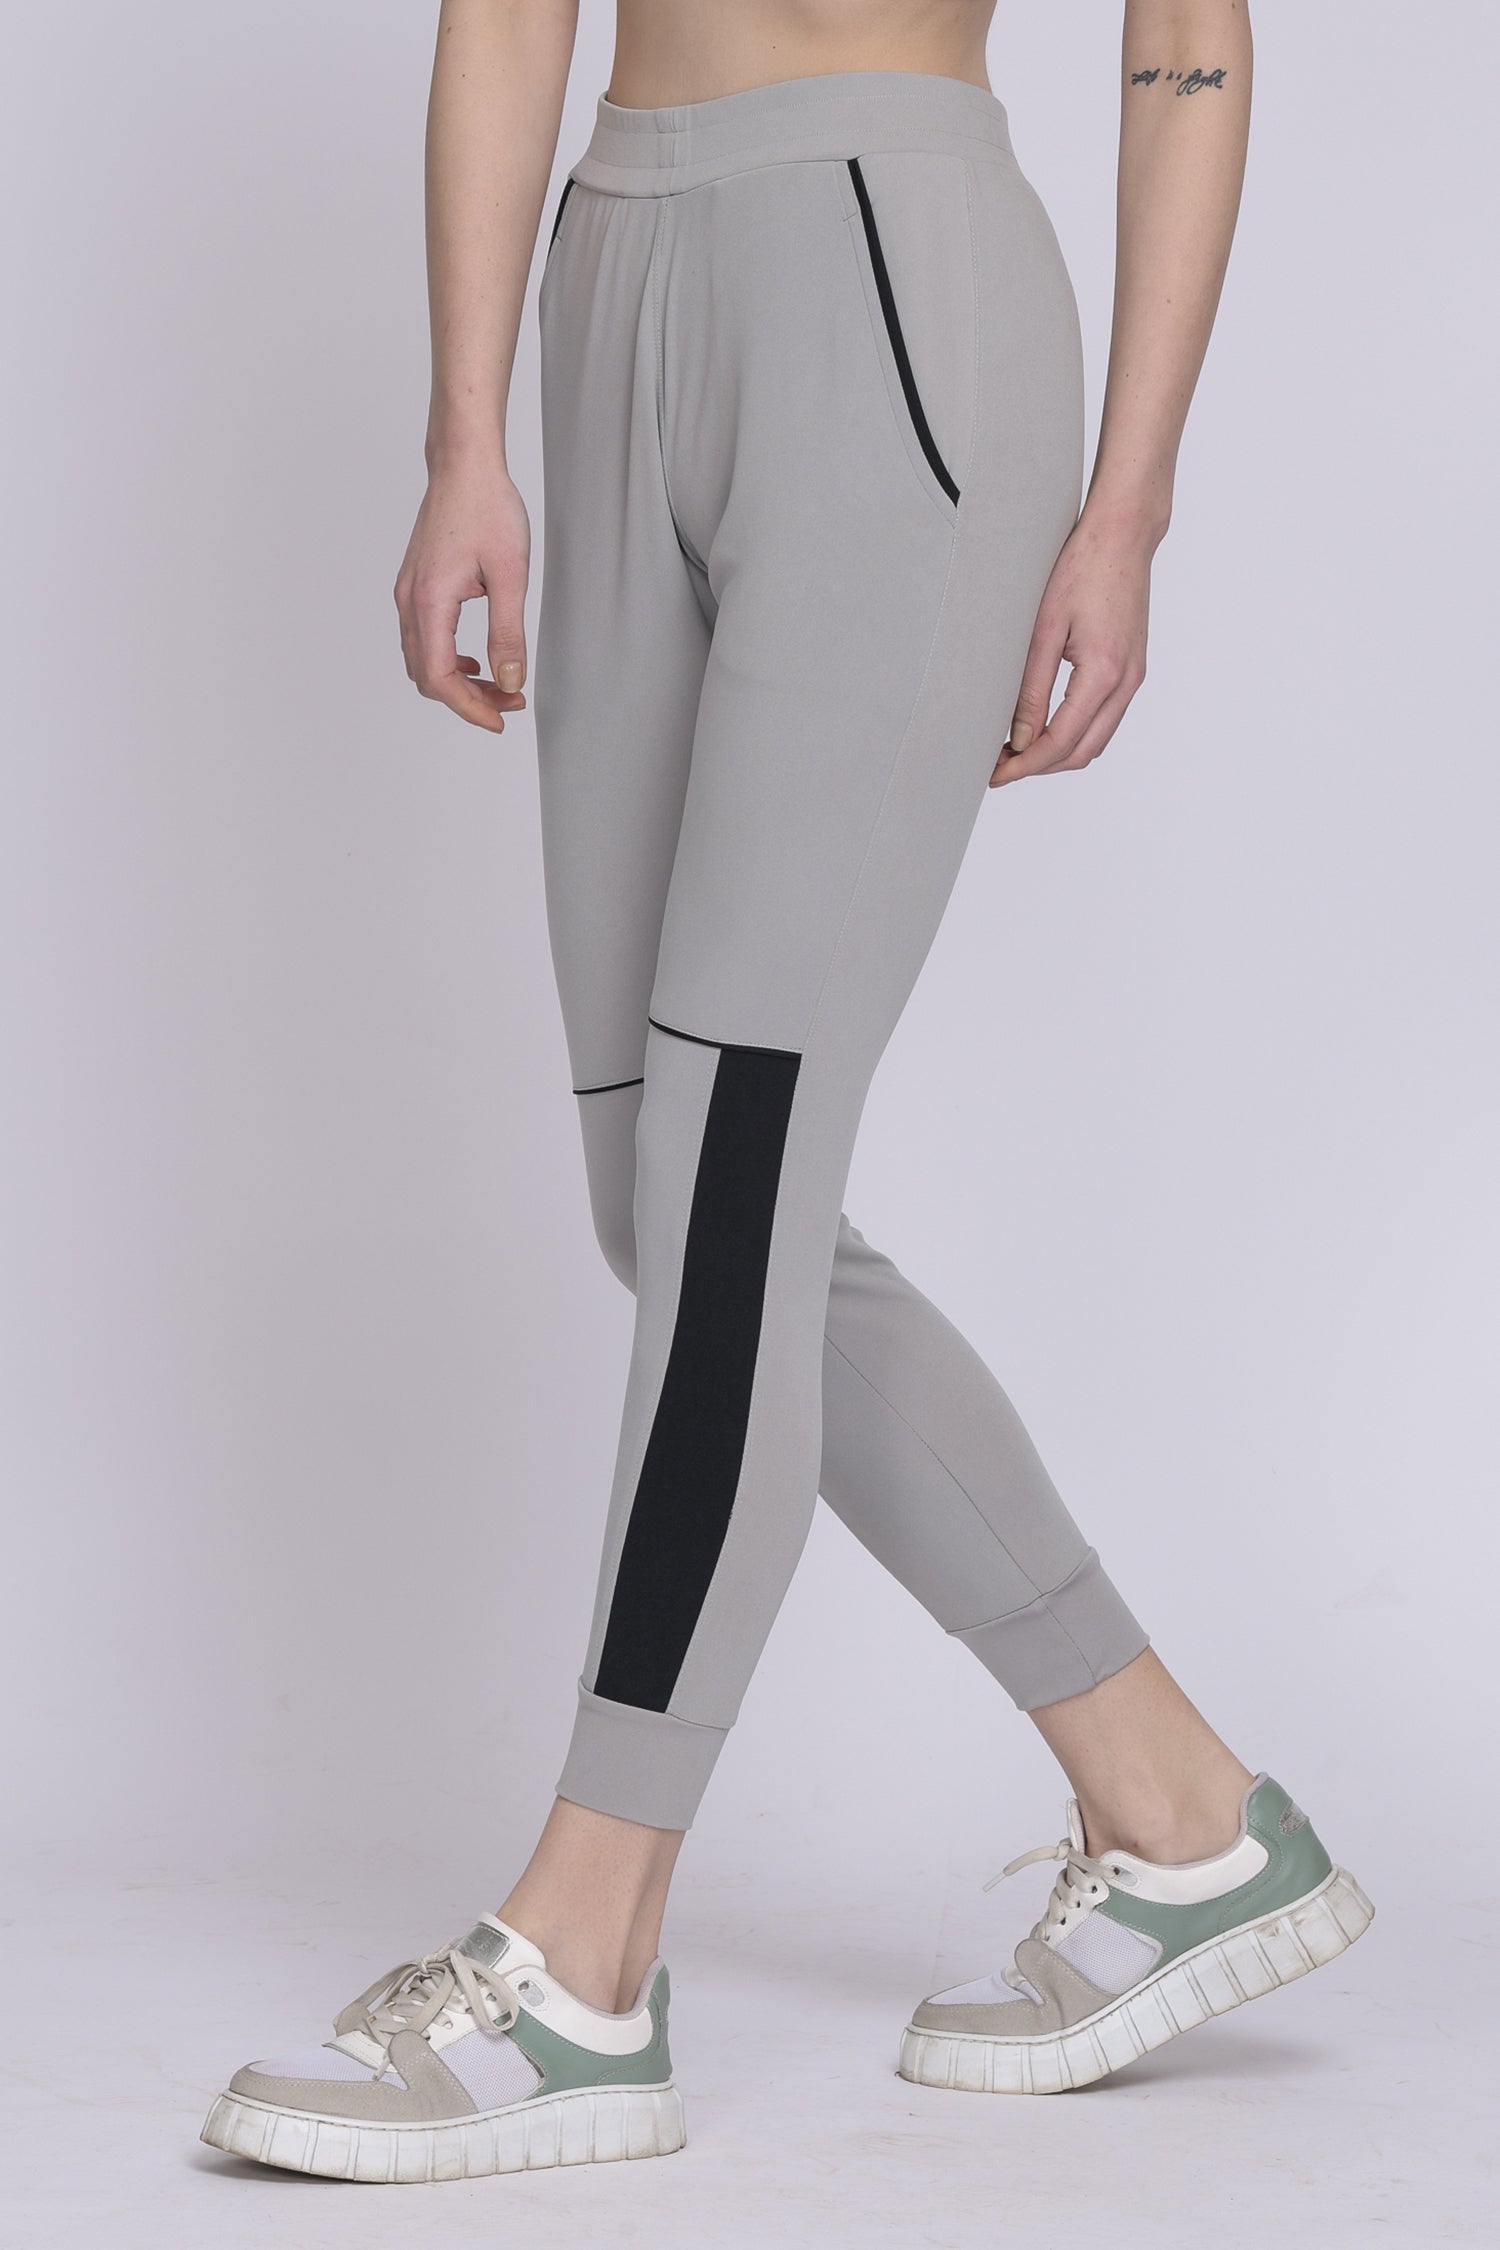 Wholesale STREETWEAR TRACK PANTS for your store - Faire